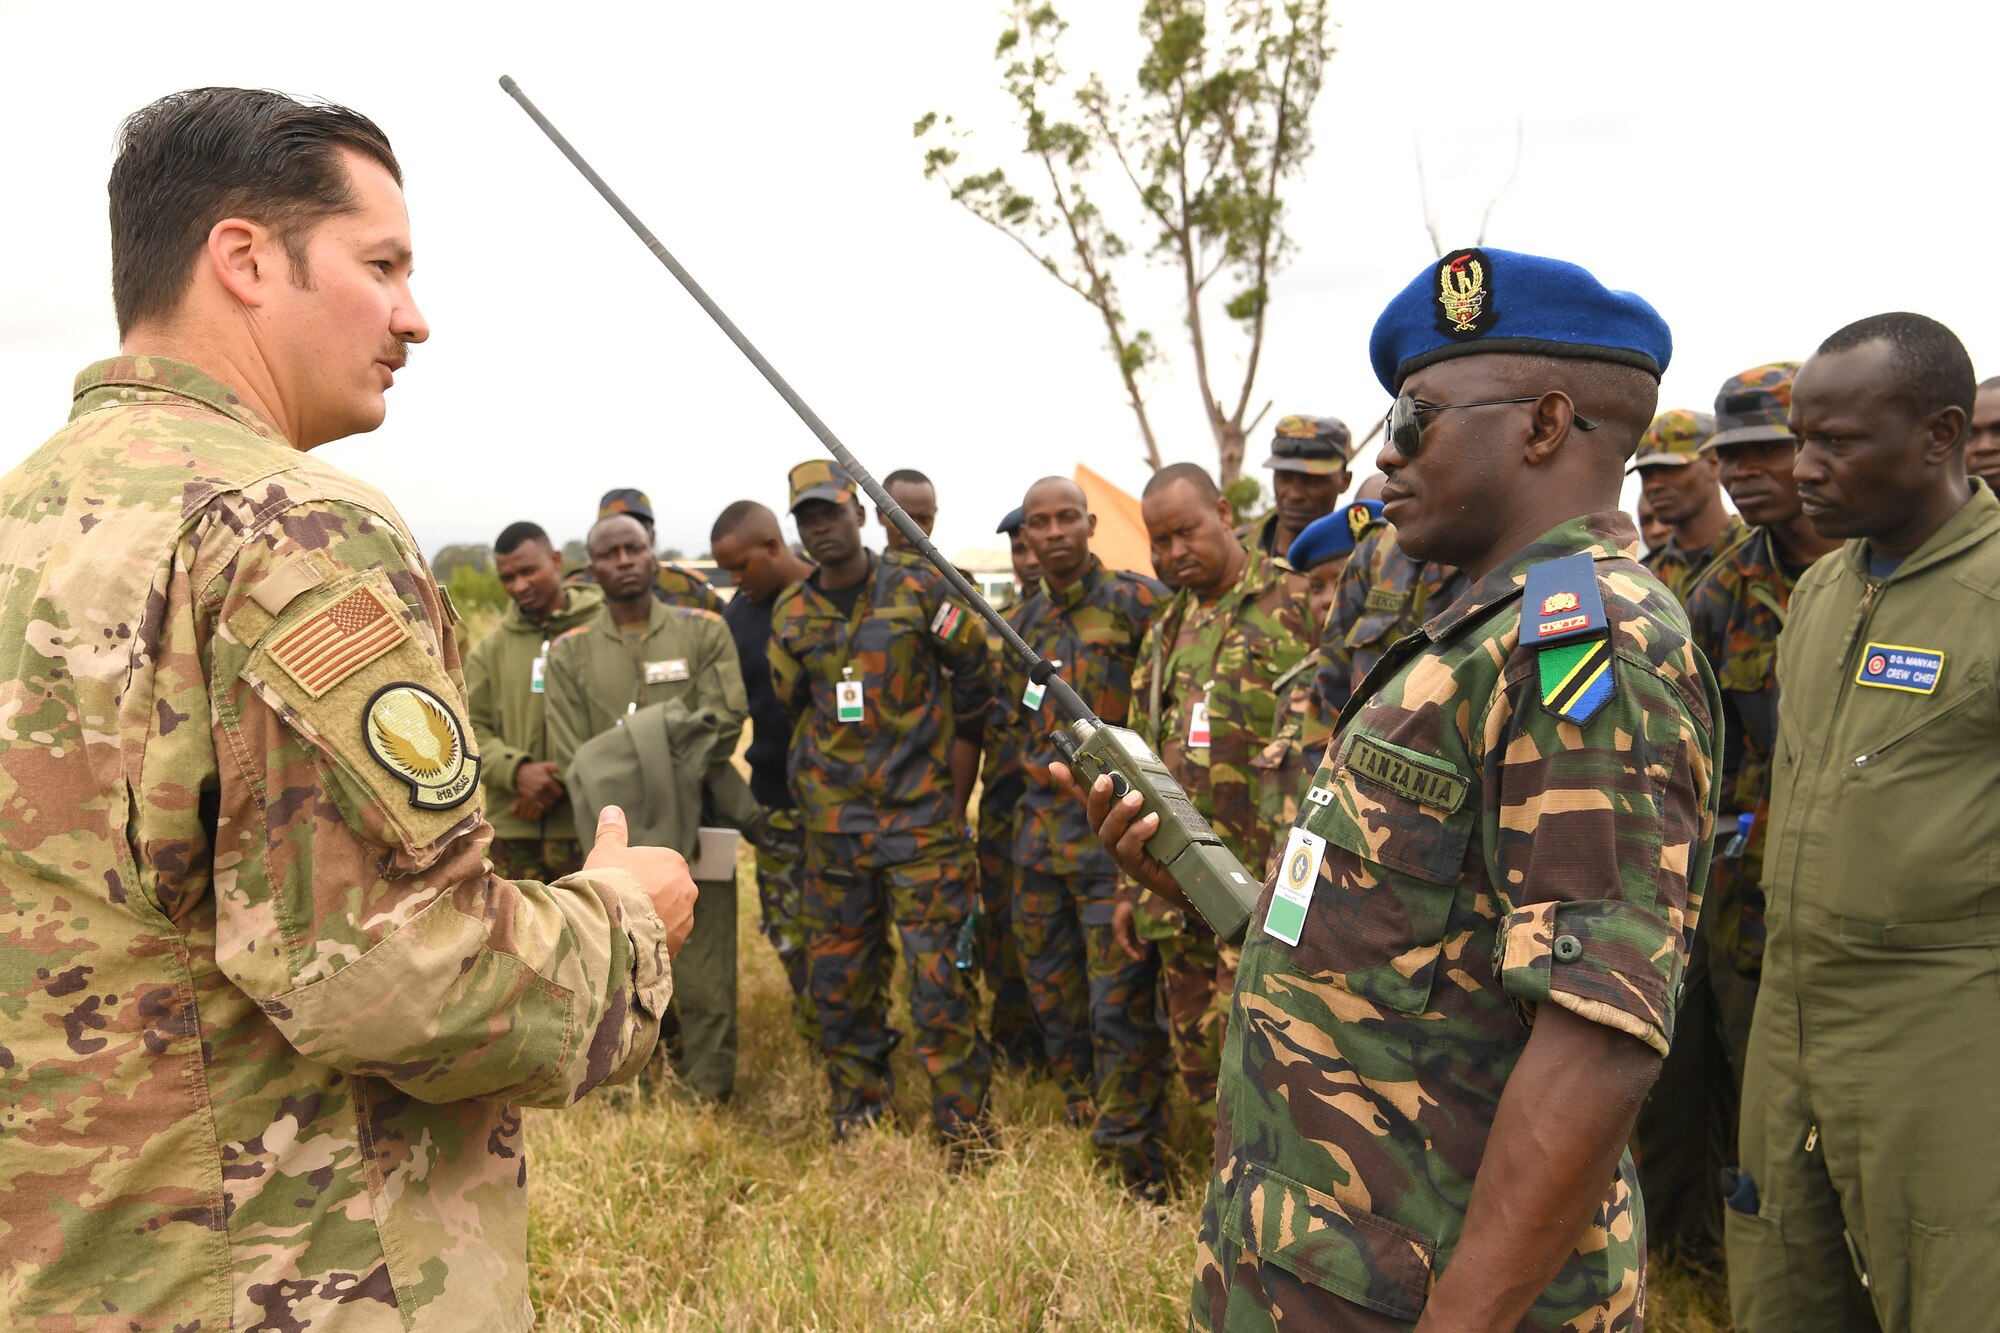 U.S. Air Force Tech. Sgt. Jared Todd, 818th Mobility Support Advisory Squadron Survival, Evasion, Resistance and Escape air advisor, and Tanzania Air Force Command Col. Ian Haule, an aircraft maintenance engineer, discuss radio communication techniques at the African Partnership Flight Kenya 2019, Laikipia Air Base, Kenya, August 22, 2019.